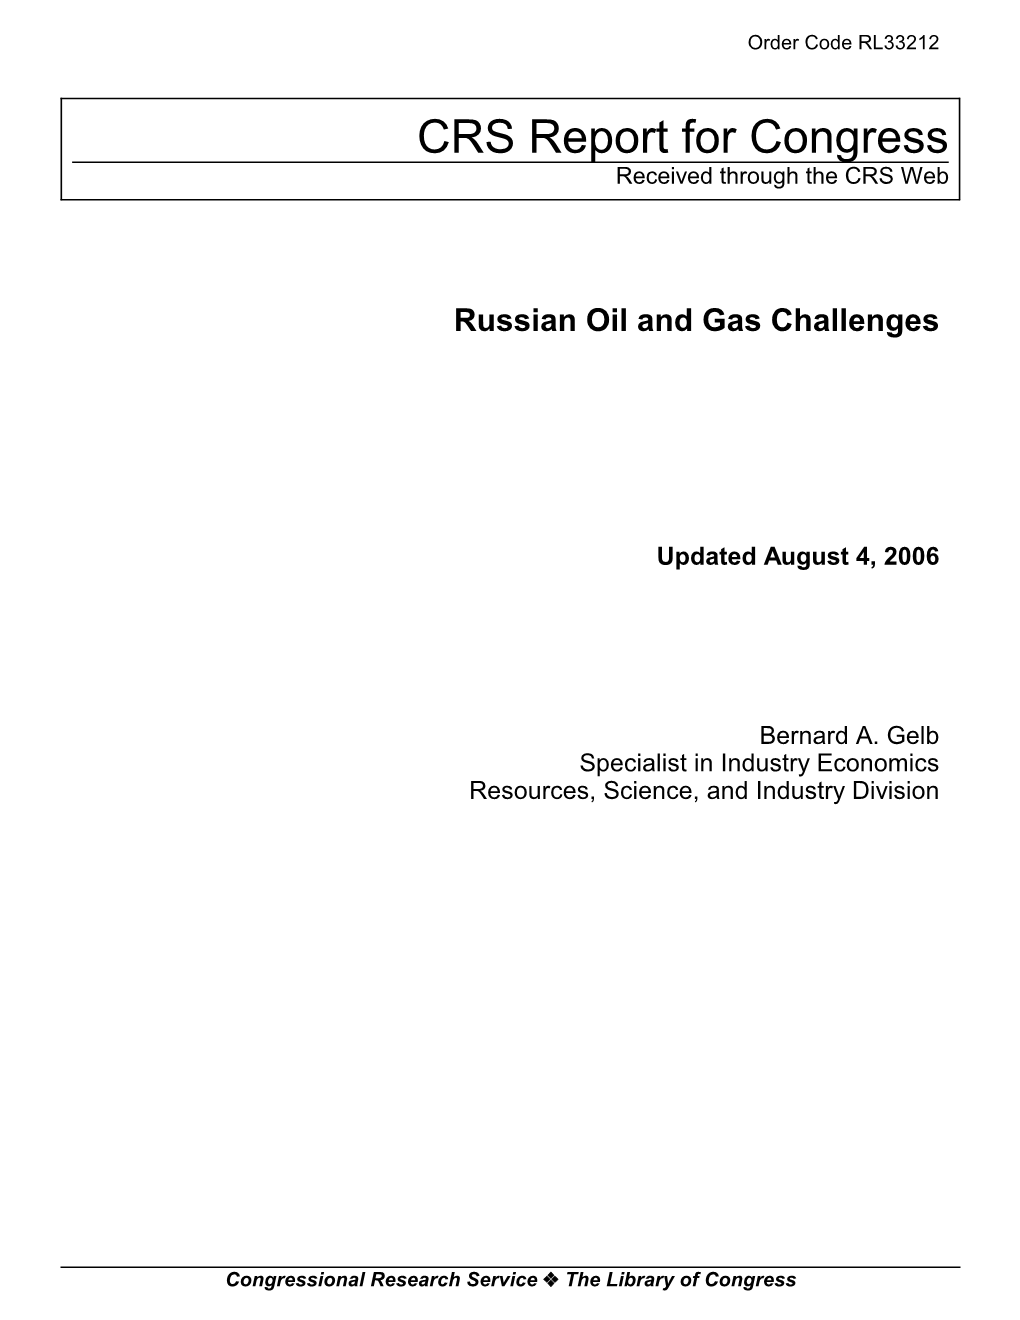 Russian Oil and Gas Challenges